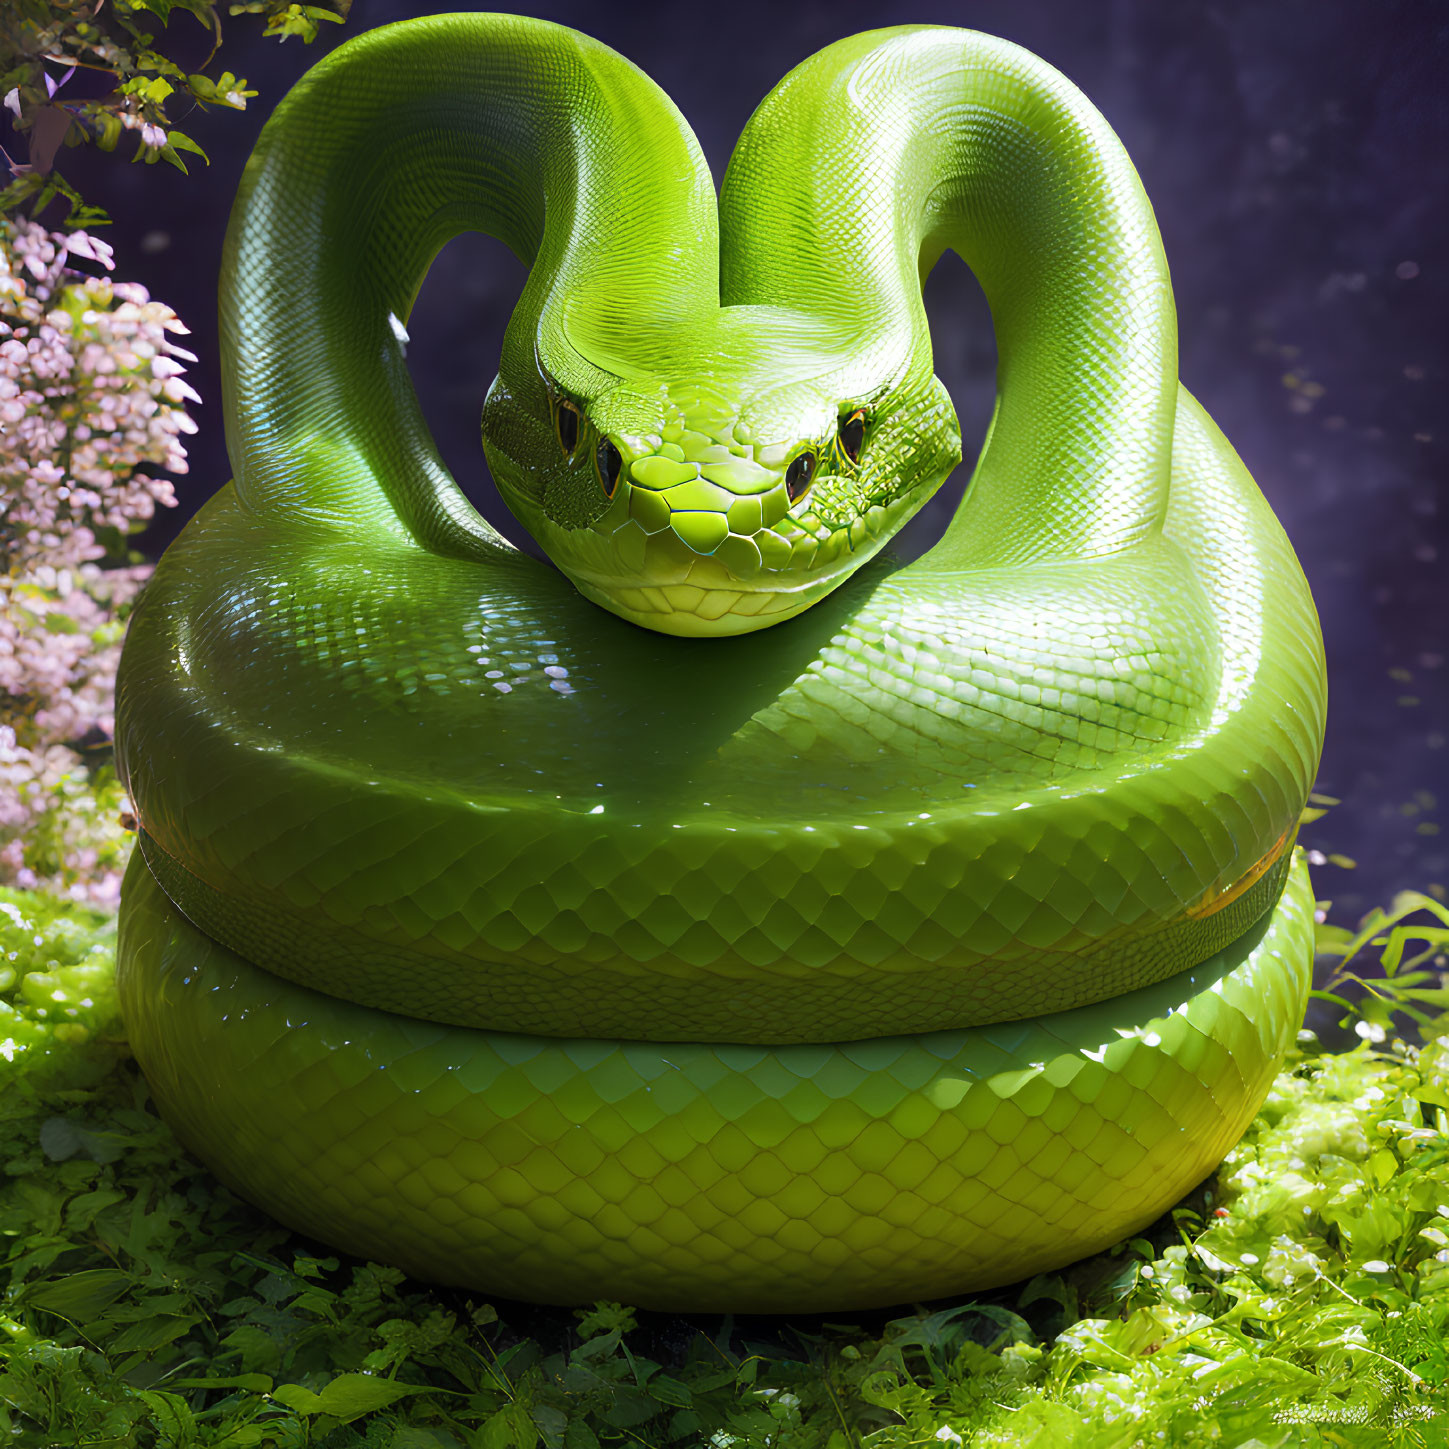 Vibrant Green Snake Coiled Among Foliage on Moody Purple Background